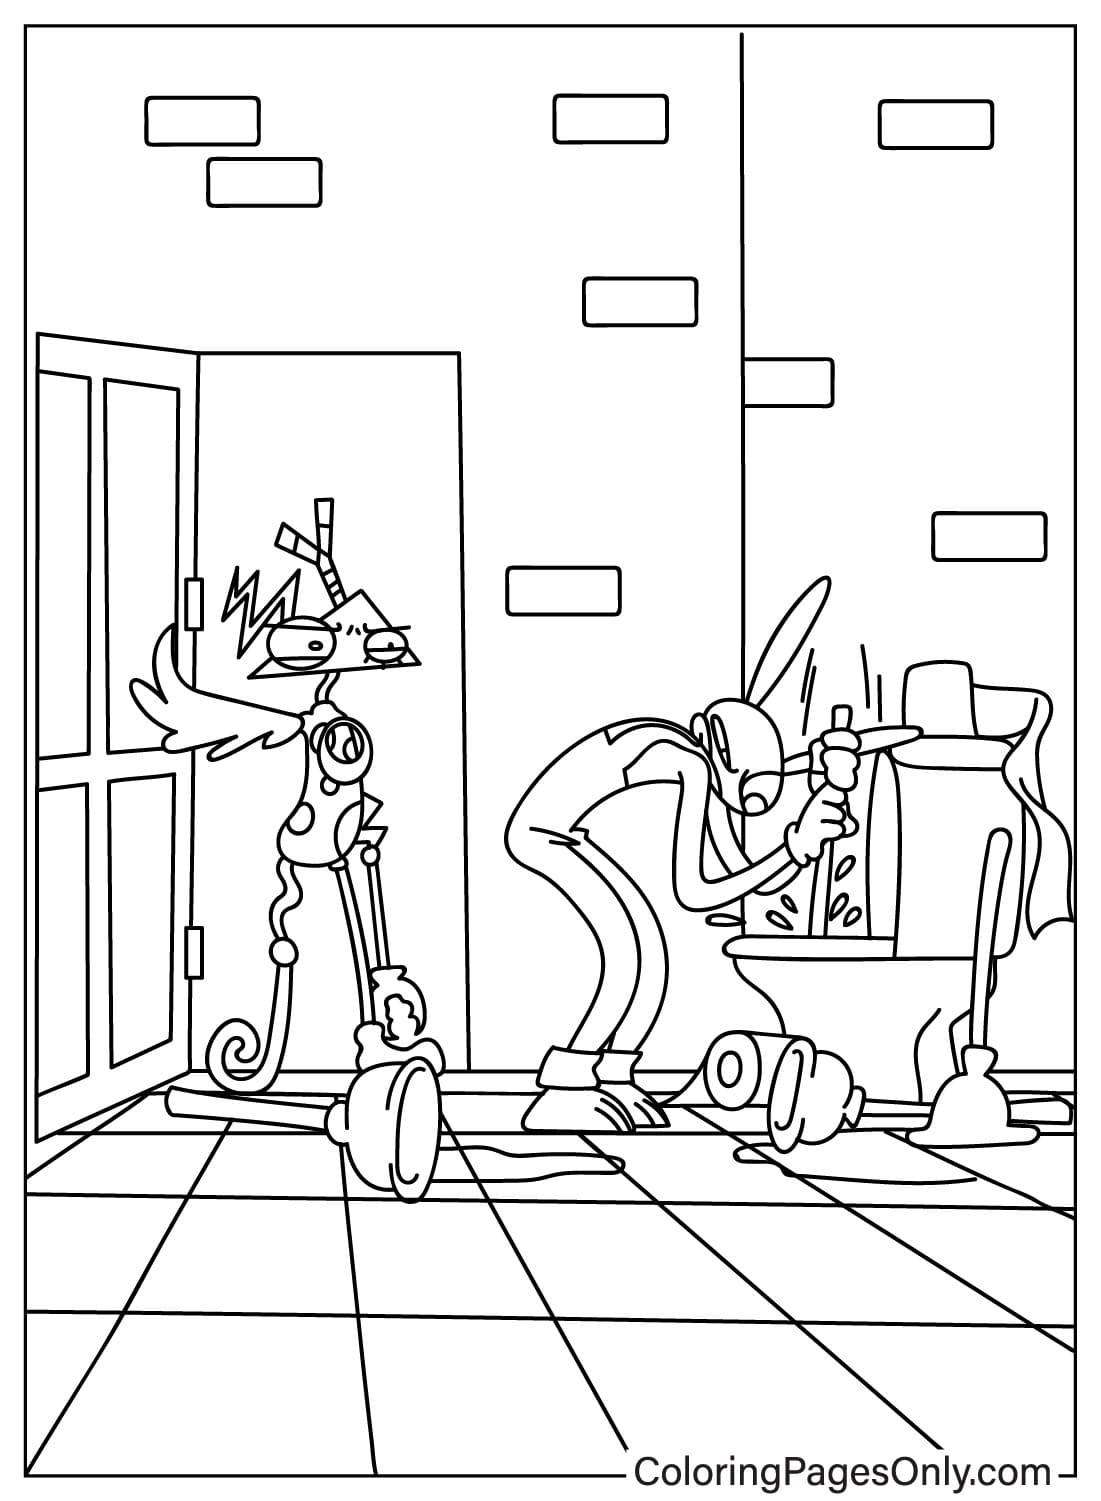 Zooble and Jax Coloring Page from The Amazing Digital Circus